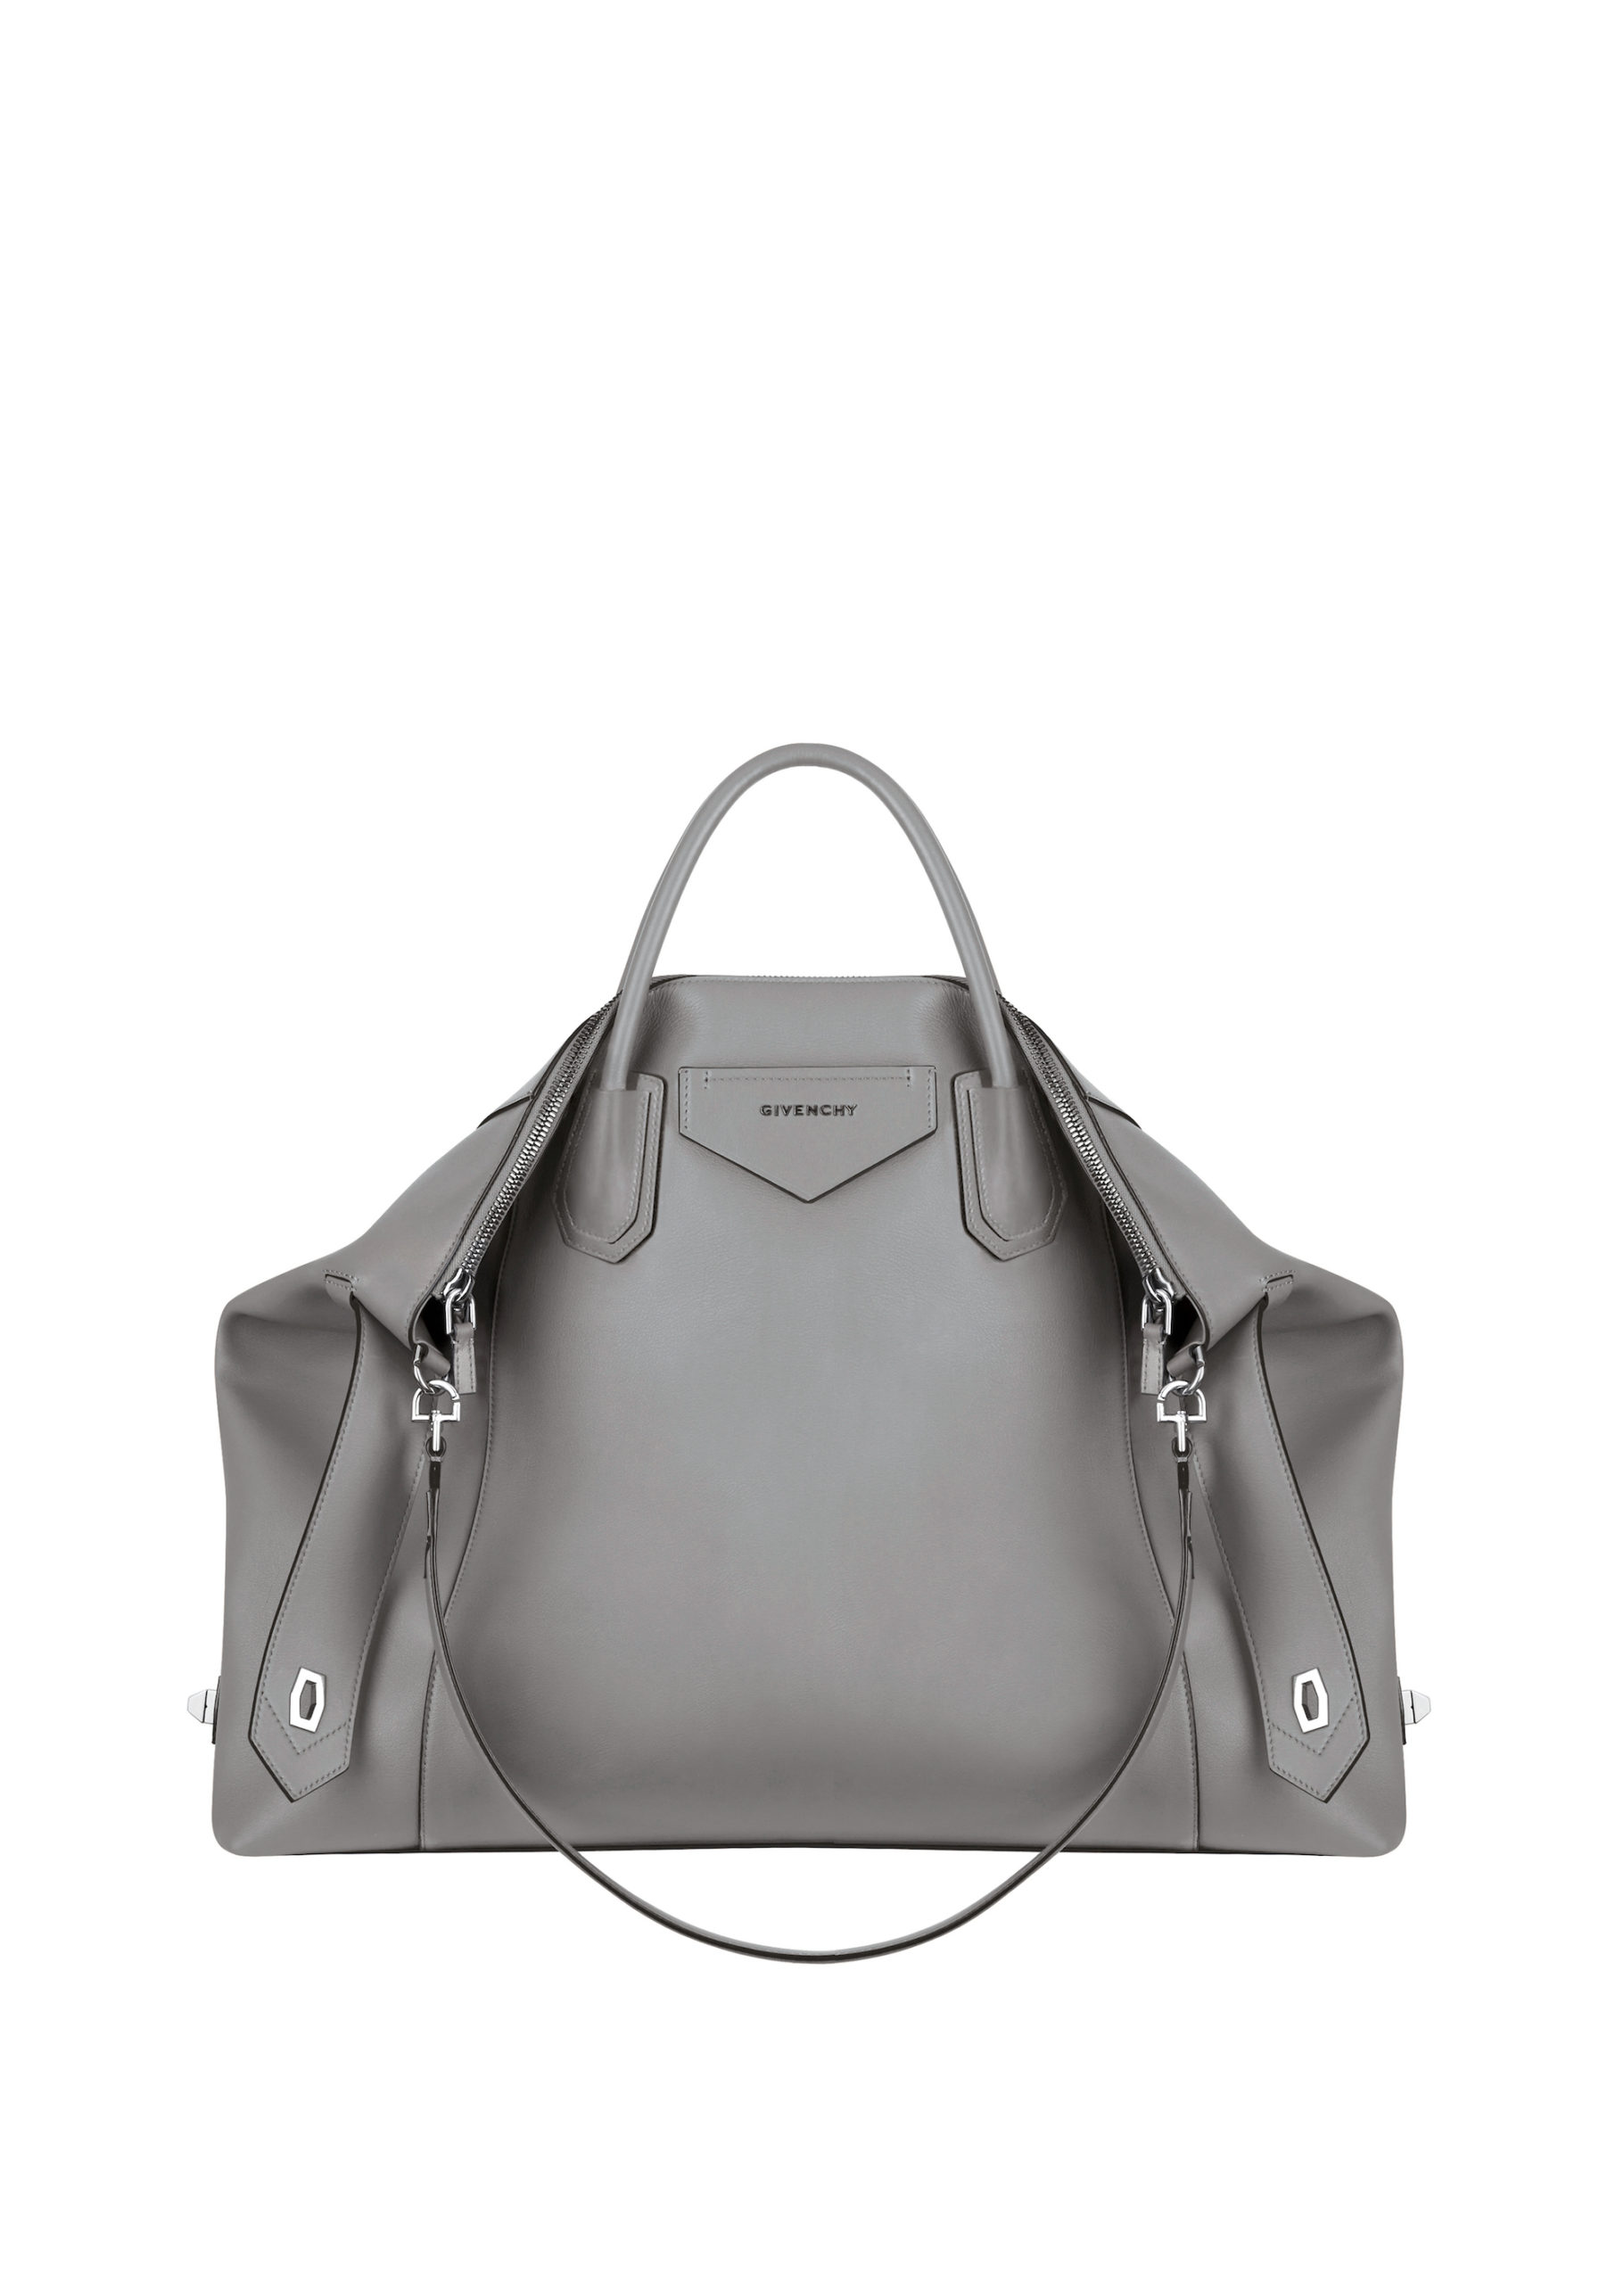 Givenchy Gives its Iconic bag, the 